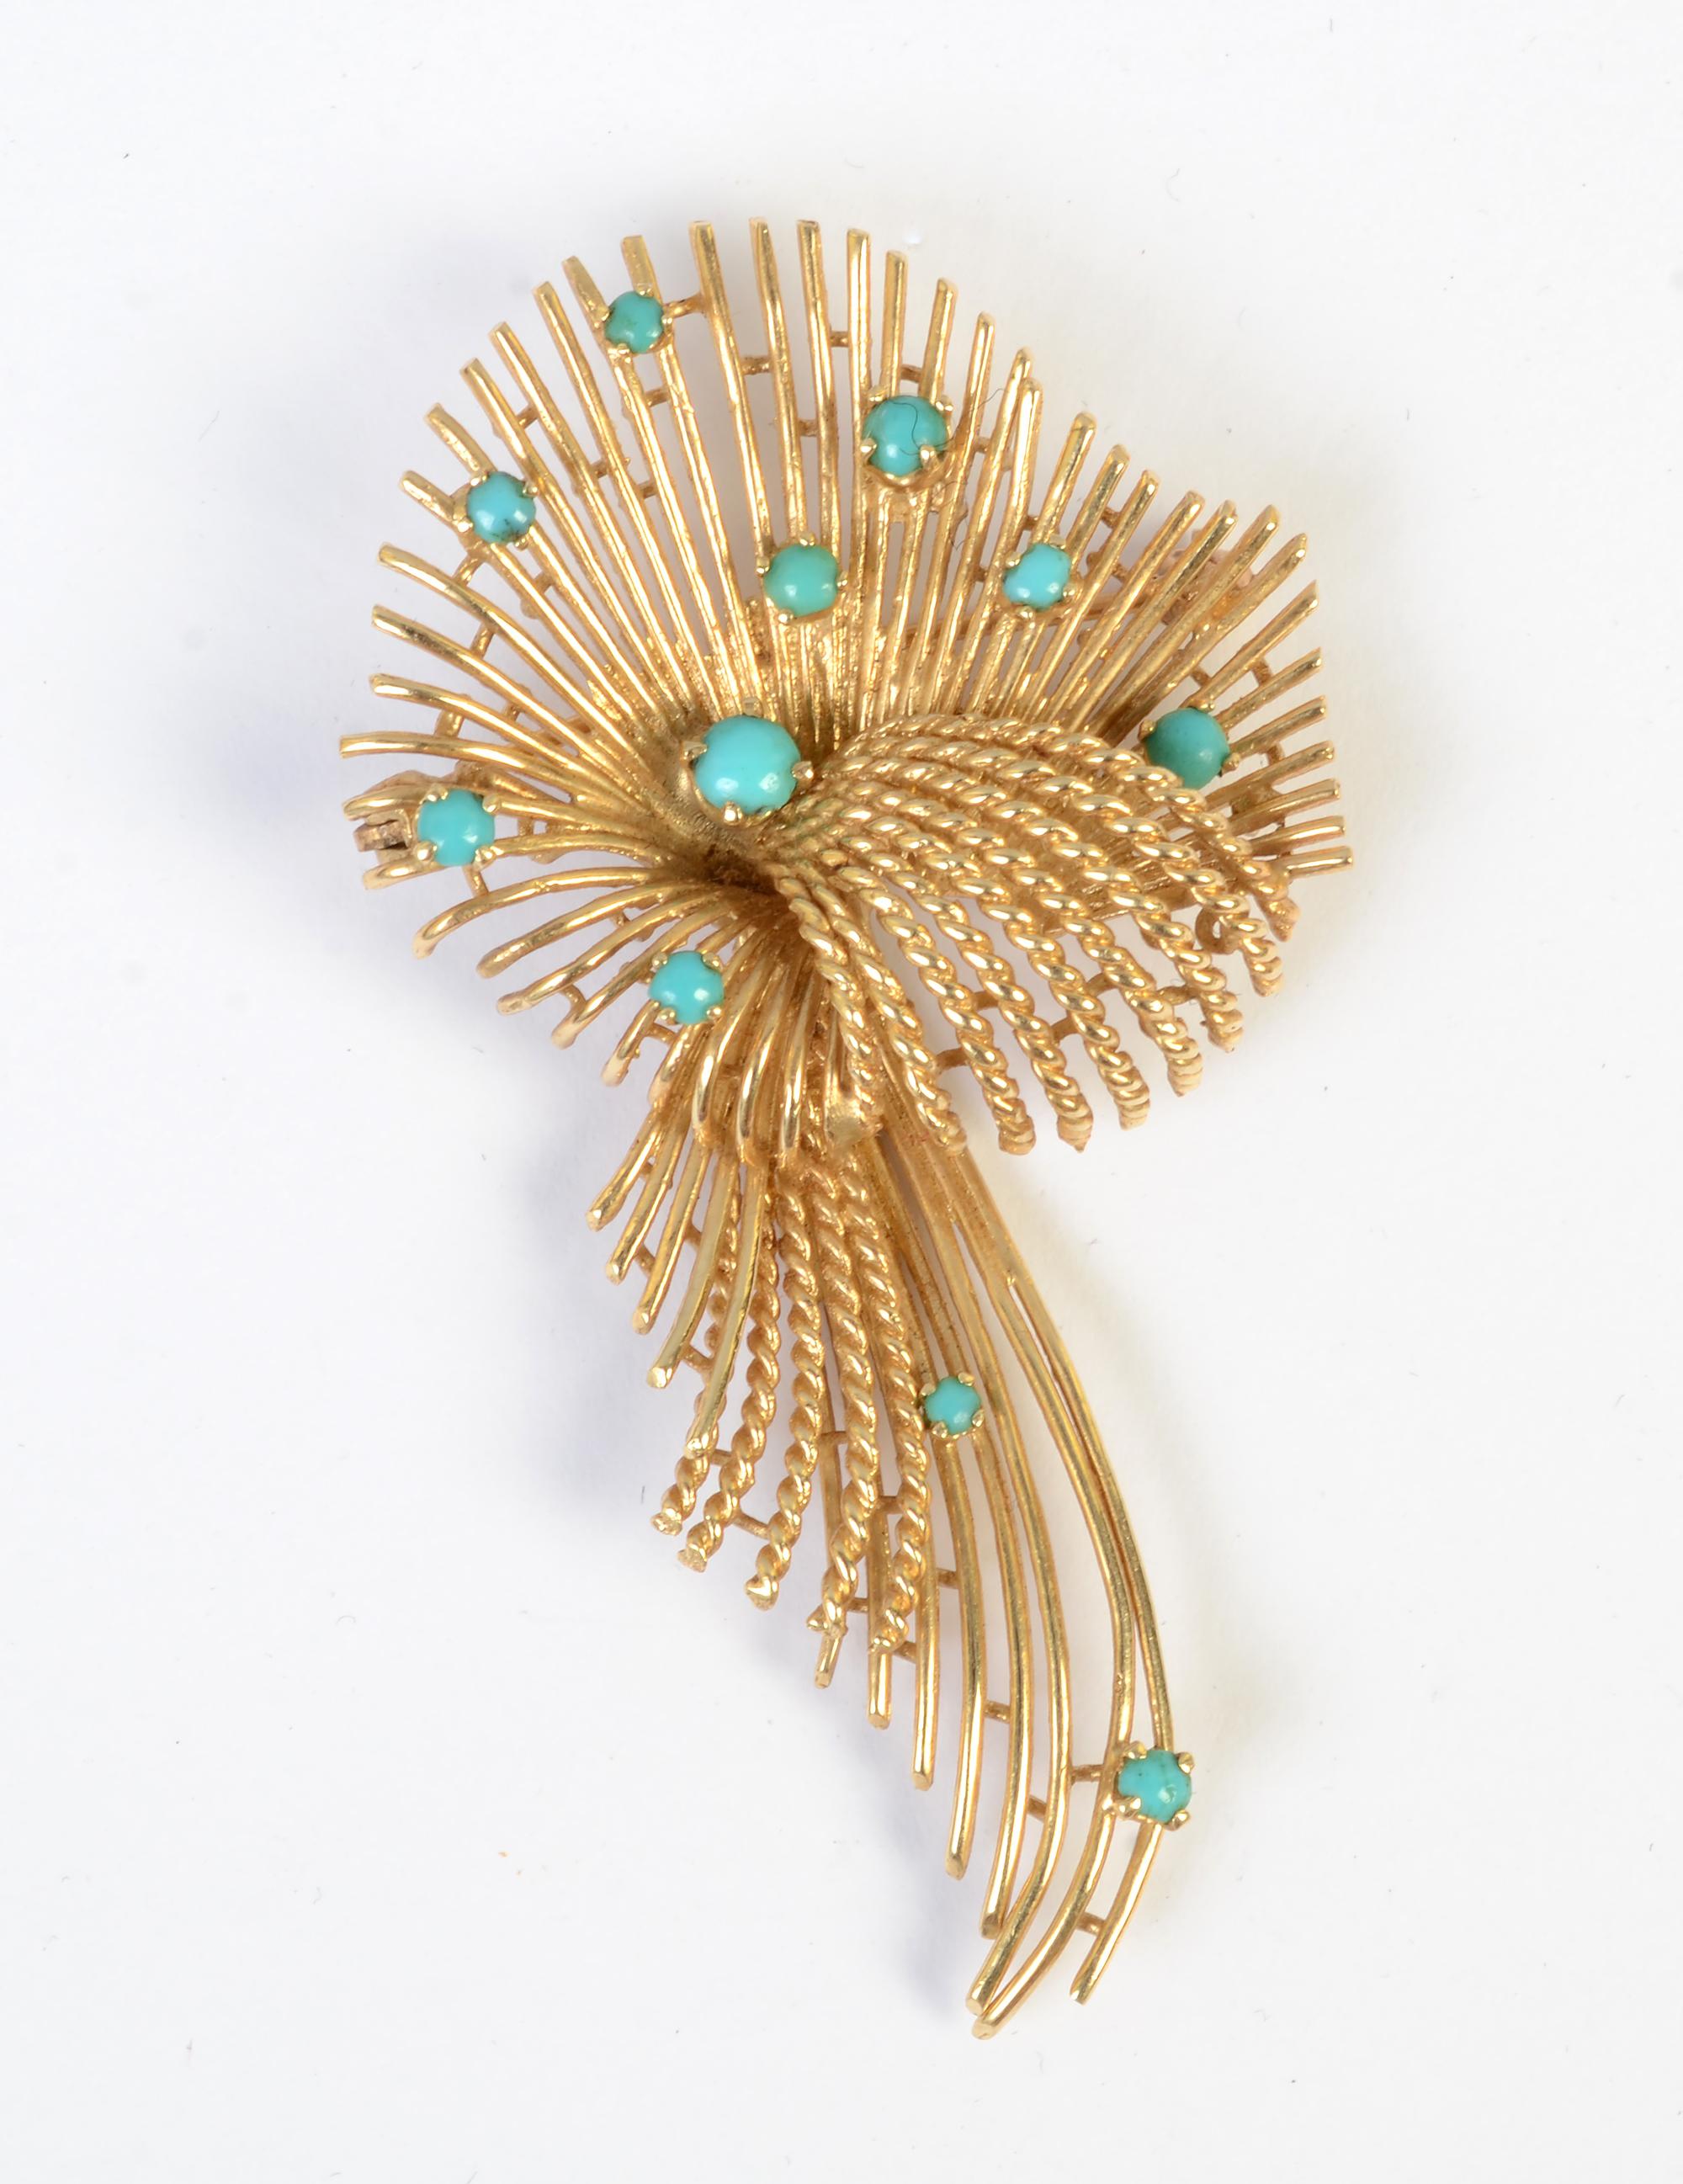 Graceful curved spokes of gold create an effect of a wafting ribbon or bow. The gold is both smooth and twisted adding to light, airy feel. Nine cabochon turquoise stones add just the right amount of color.
The brooch is 2 3/8